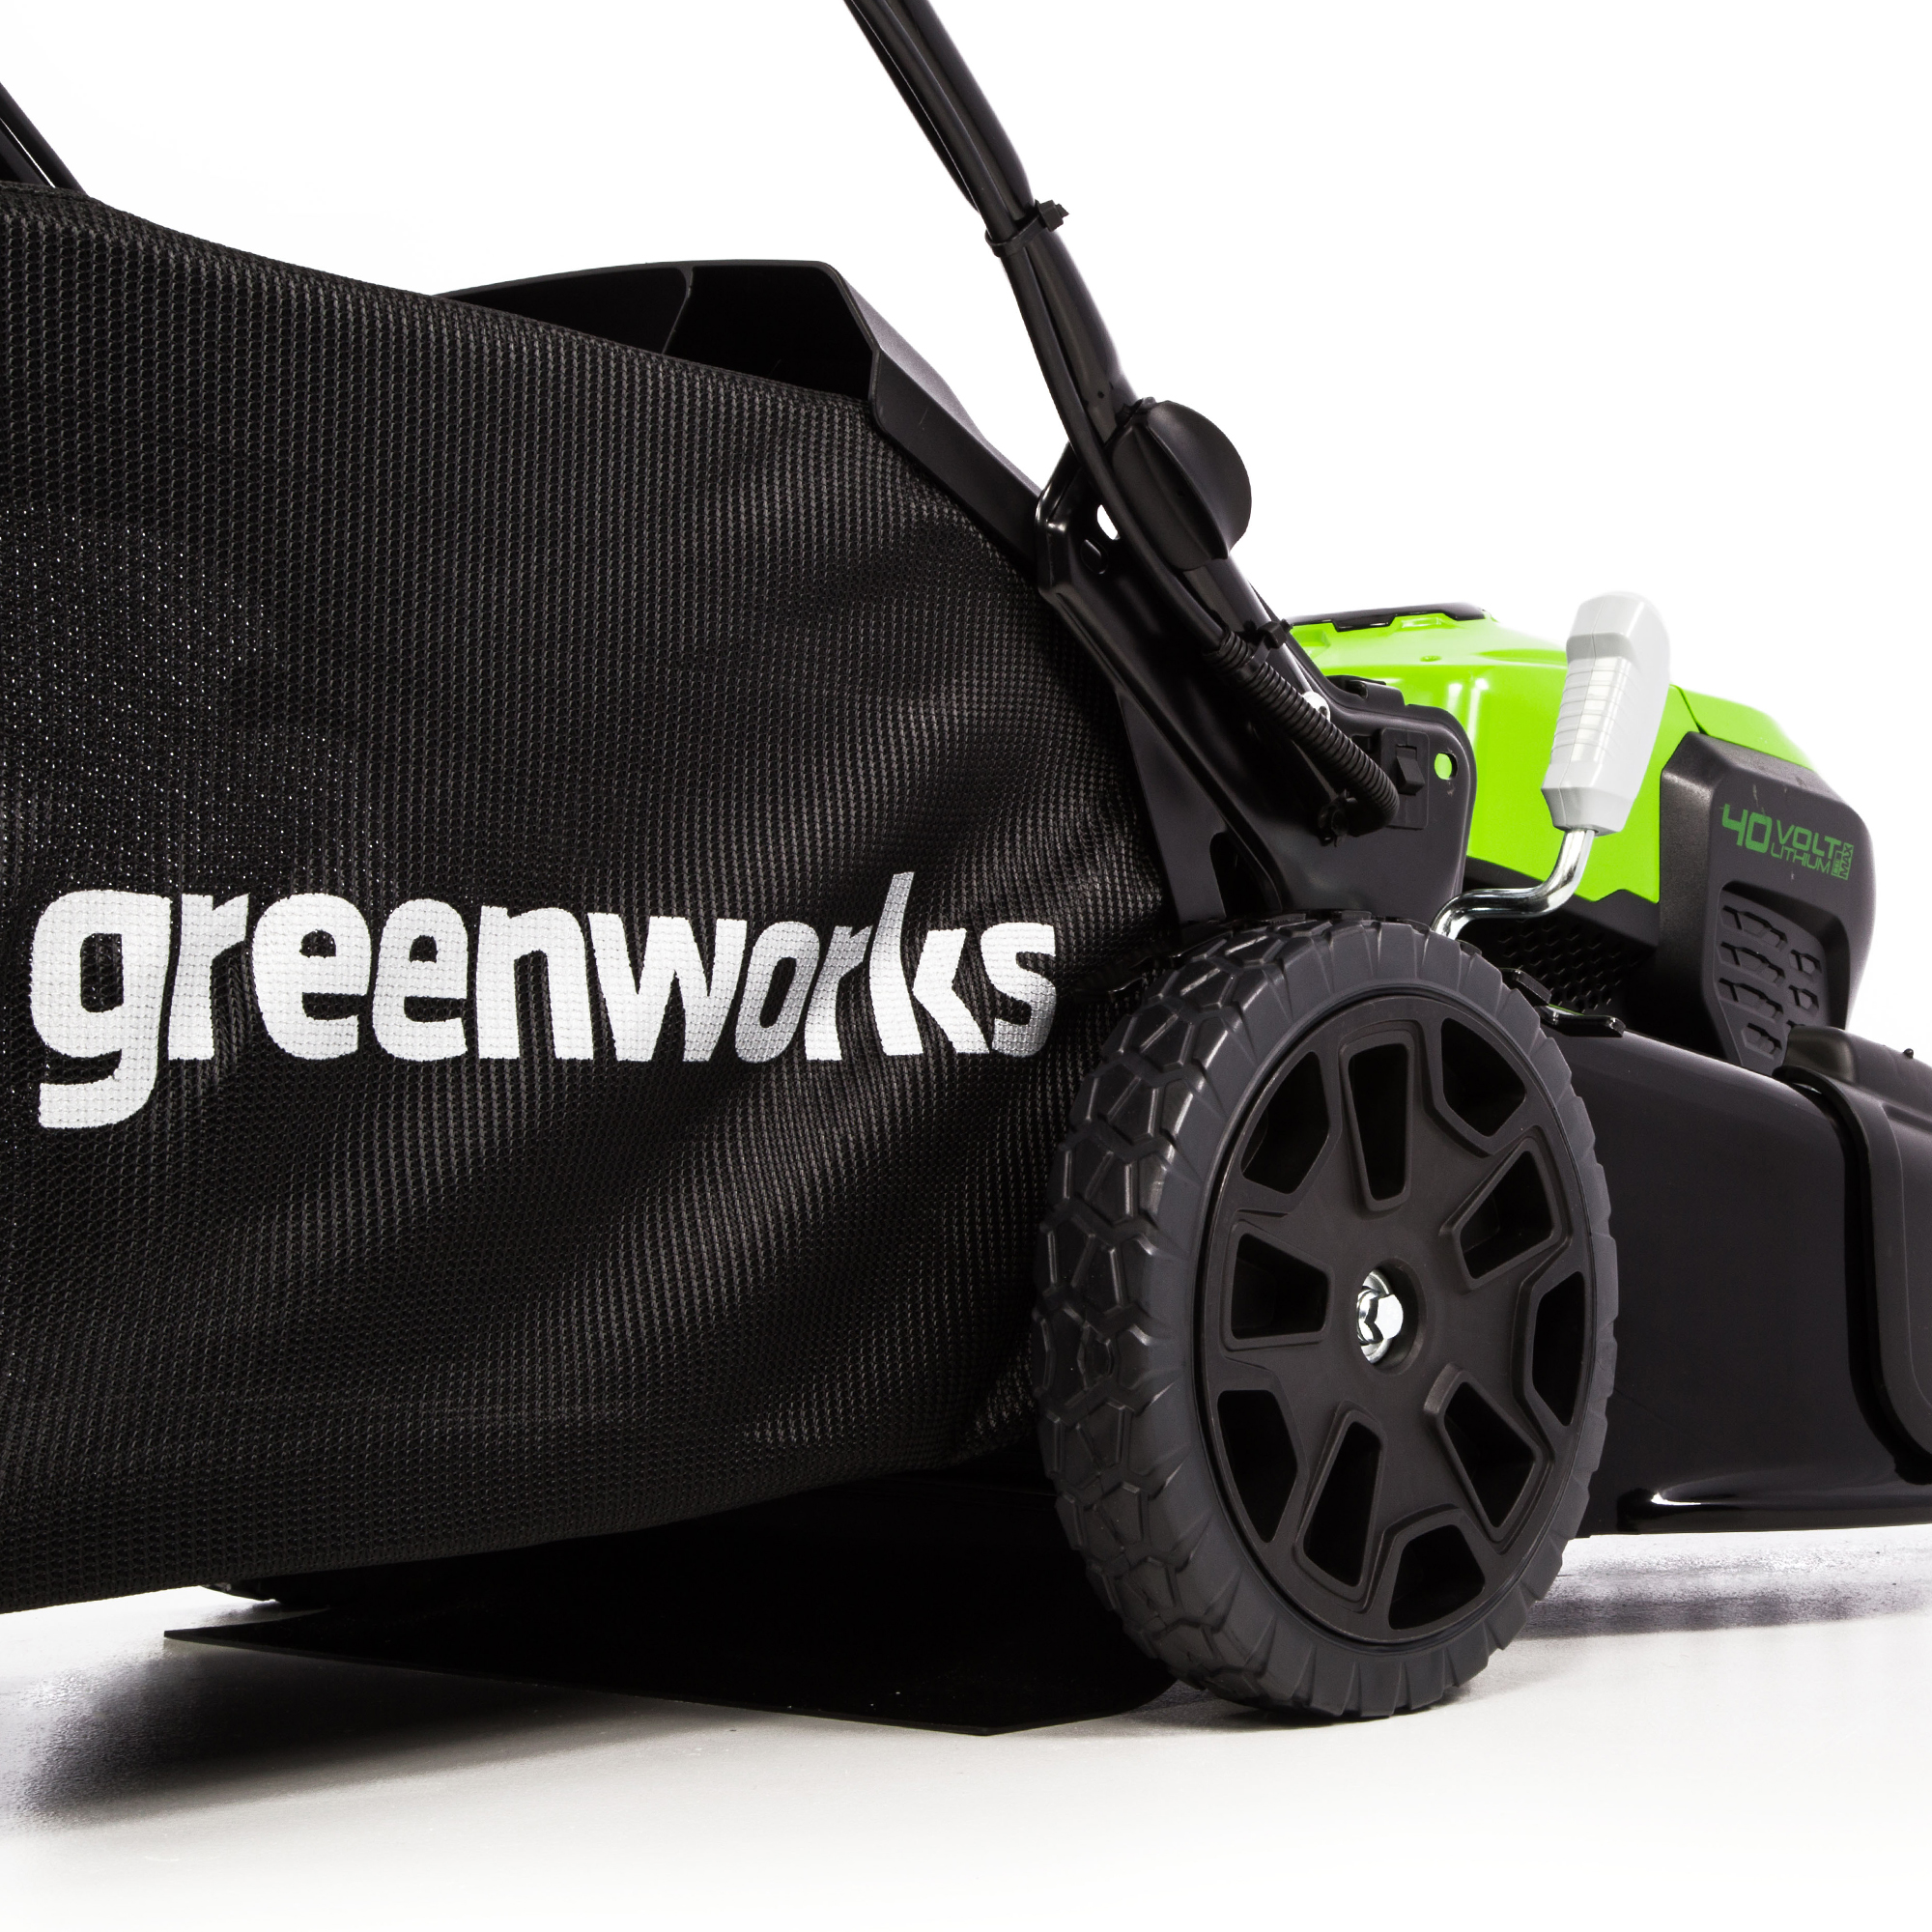 Greenworks 21" 40V Self-Propelled Lawn Mower with 5.0 Ah Battery & Charger​ 2516402 - image 5 of 16